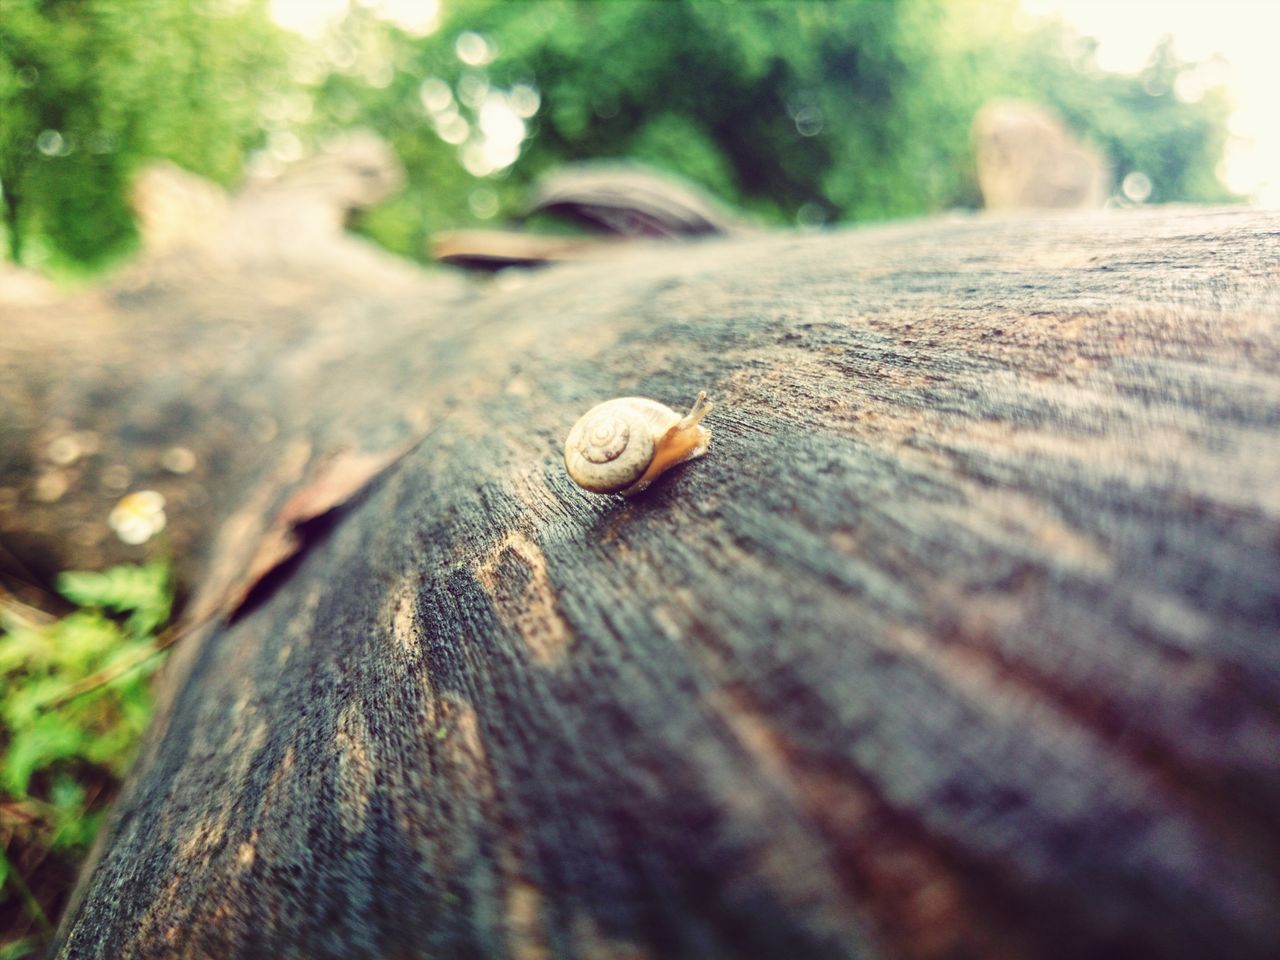 animal themes, one animal, animals in the wild, wildlife, wood - material, selective focus, insect, close-up, wooden, focus on foreground, plank, wood, nature, textured, outdoors, surface level, day, snail, no people, boardwalk